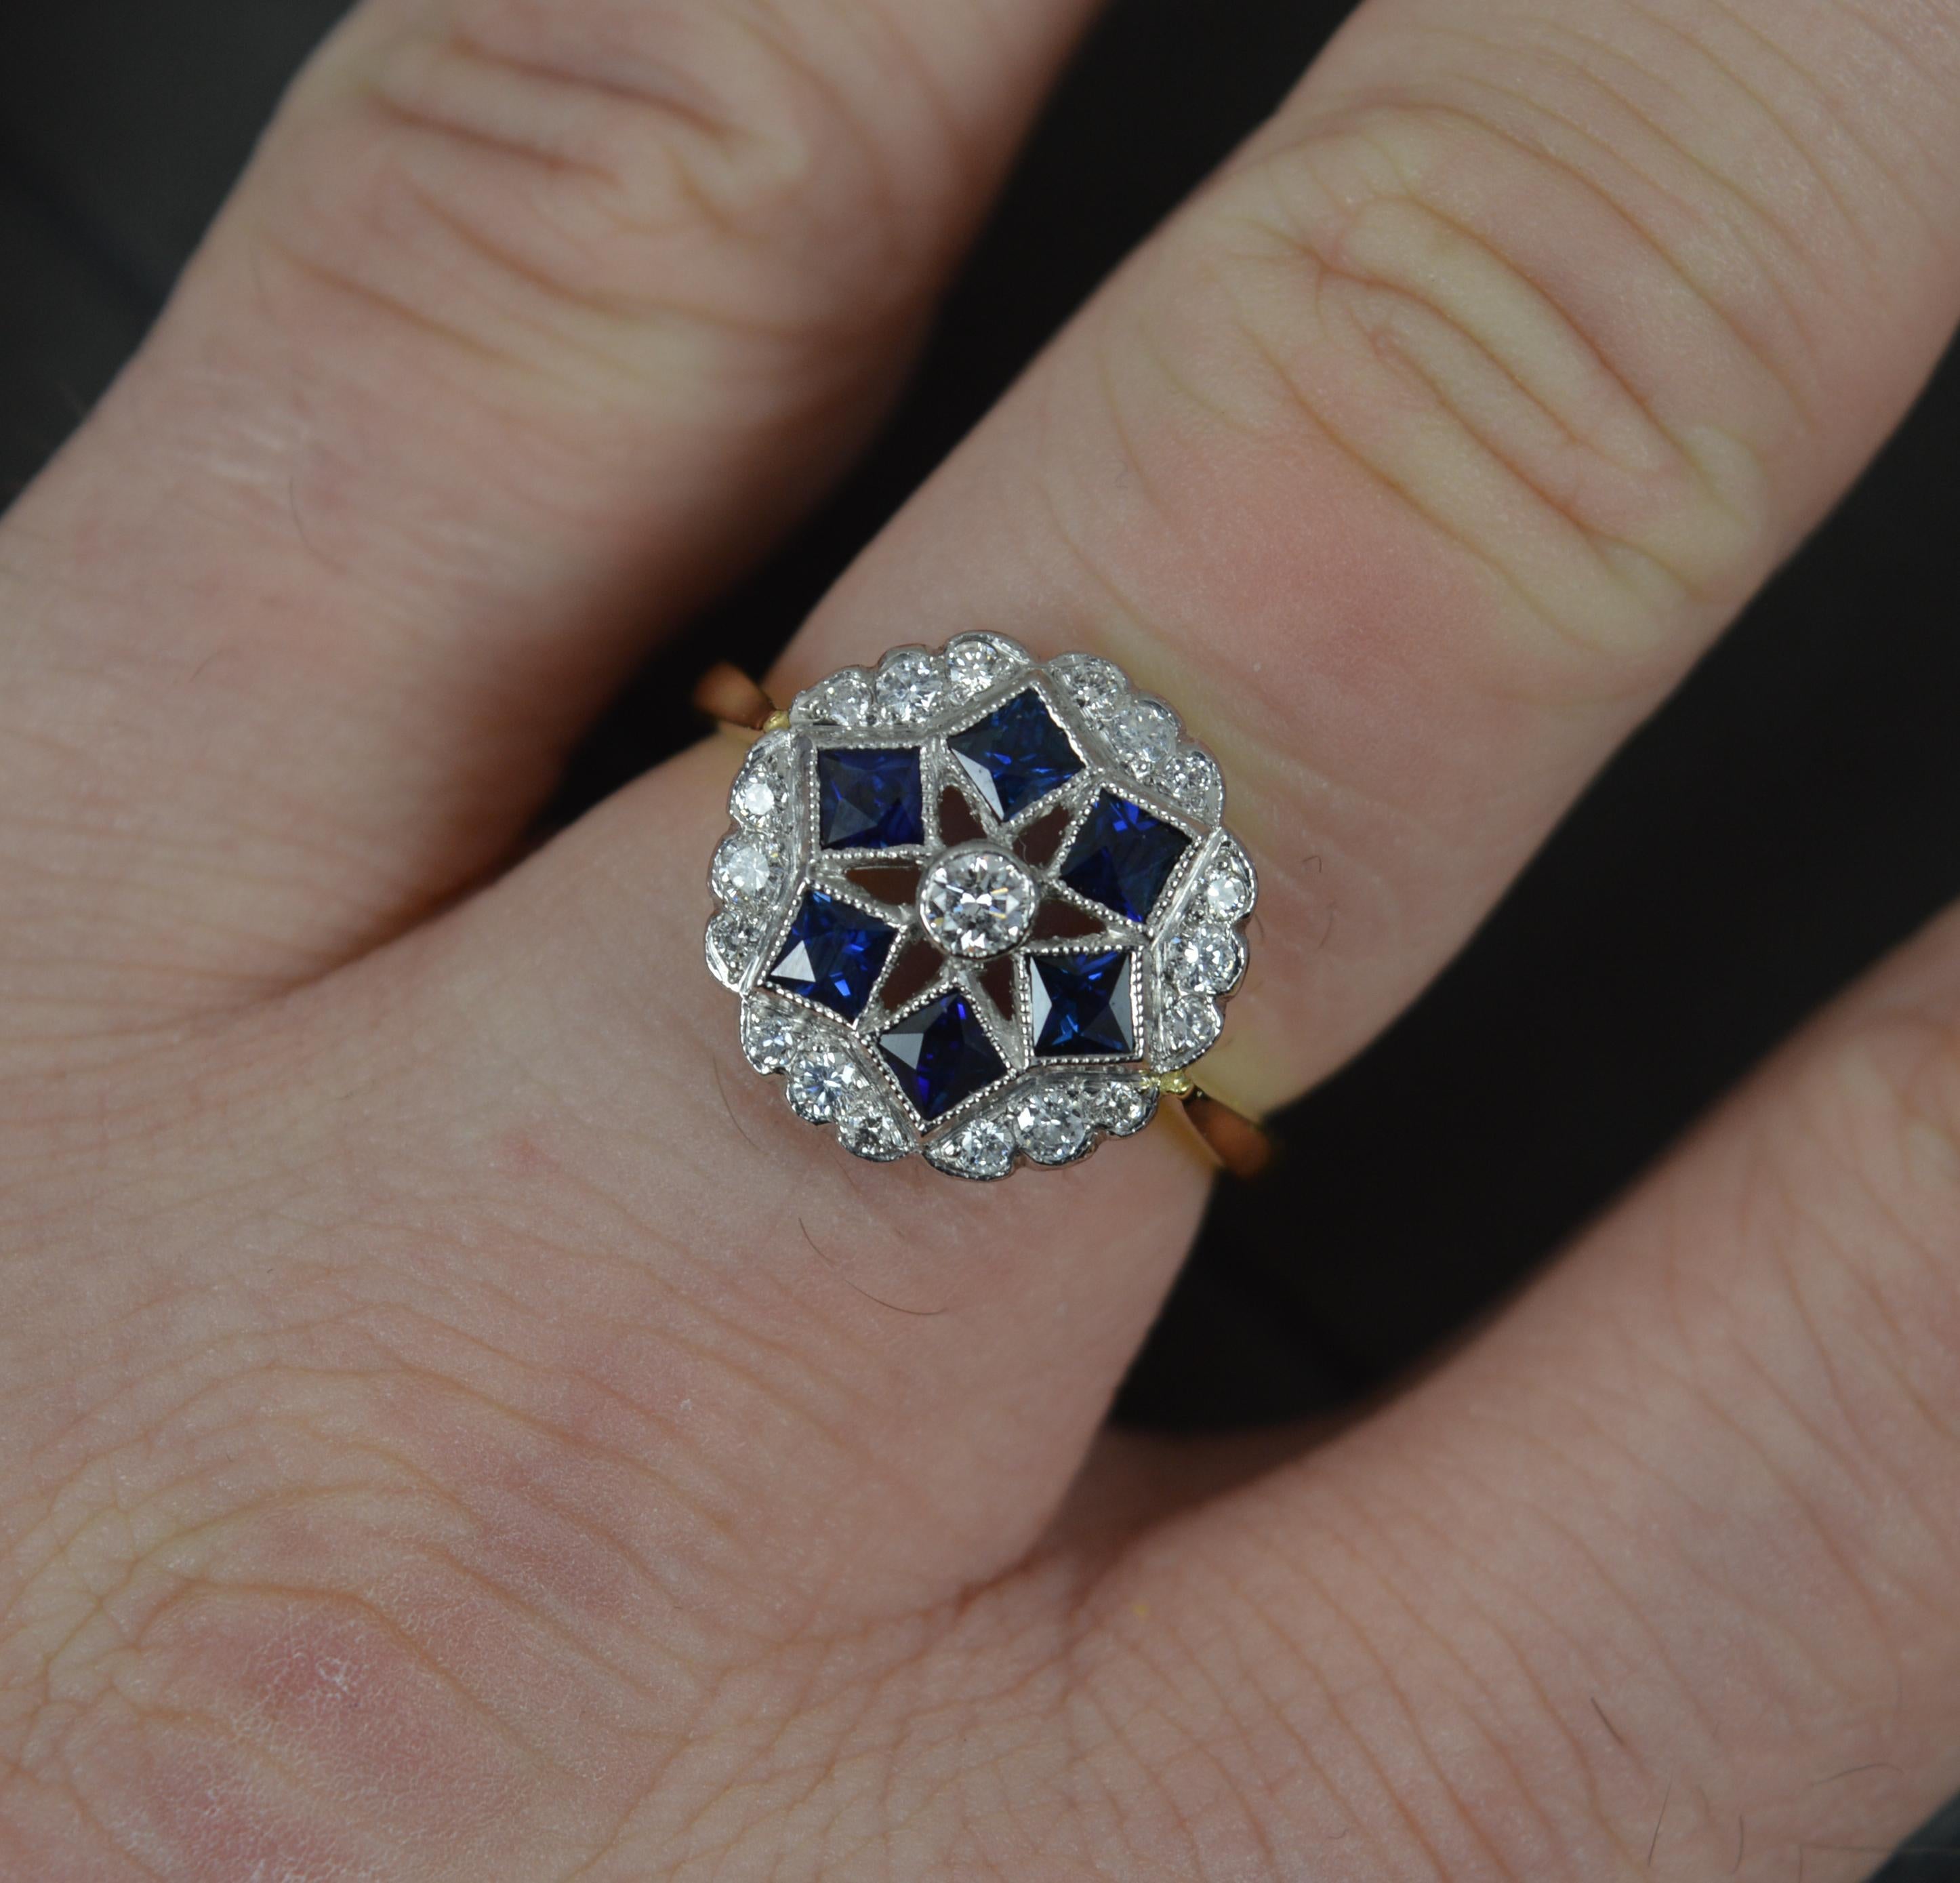 A superb contemporary cluster panel ring.
Solid 18 carat yellow gold shank with white gold head setting.
A circular panel set with many round brilliant cut diamonds and six French cut sapphires into a pierced head. 
14mm x 14mm cluster head.